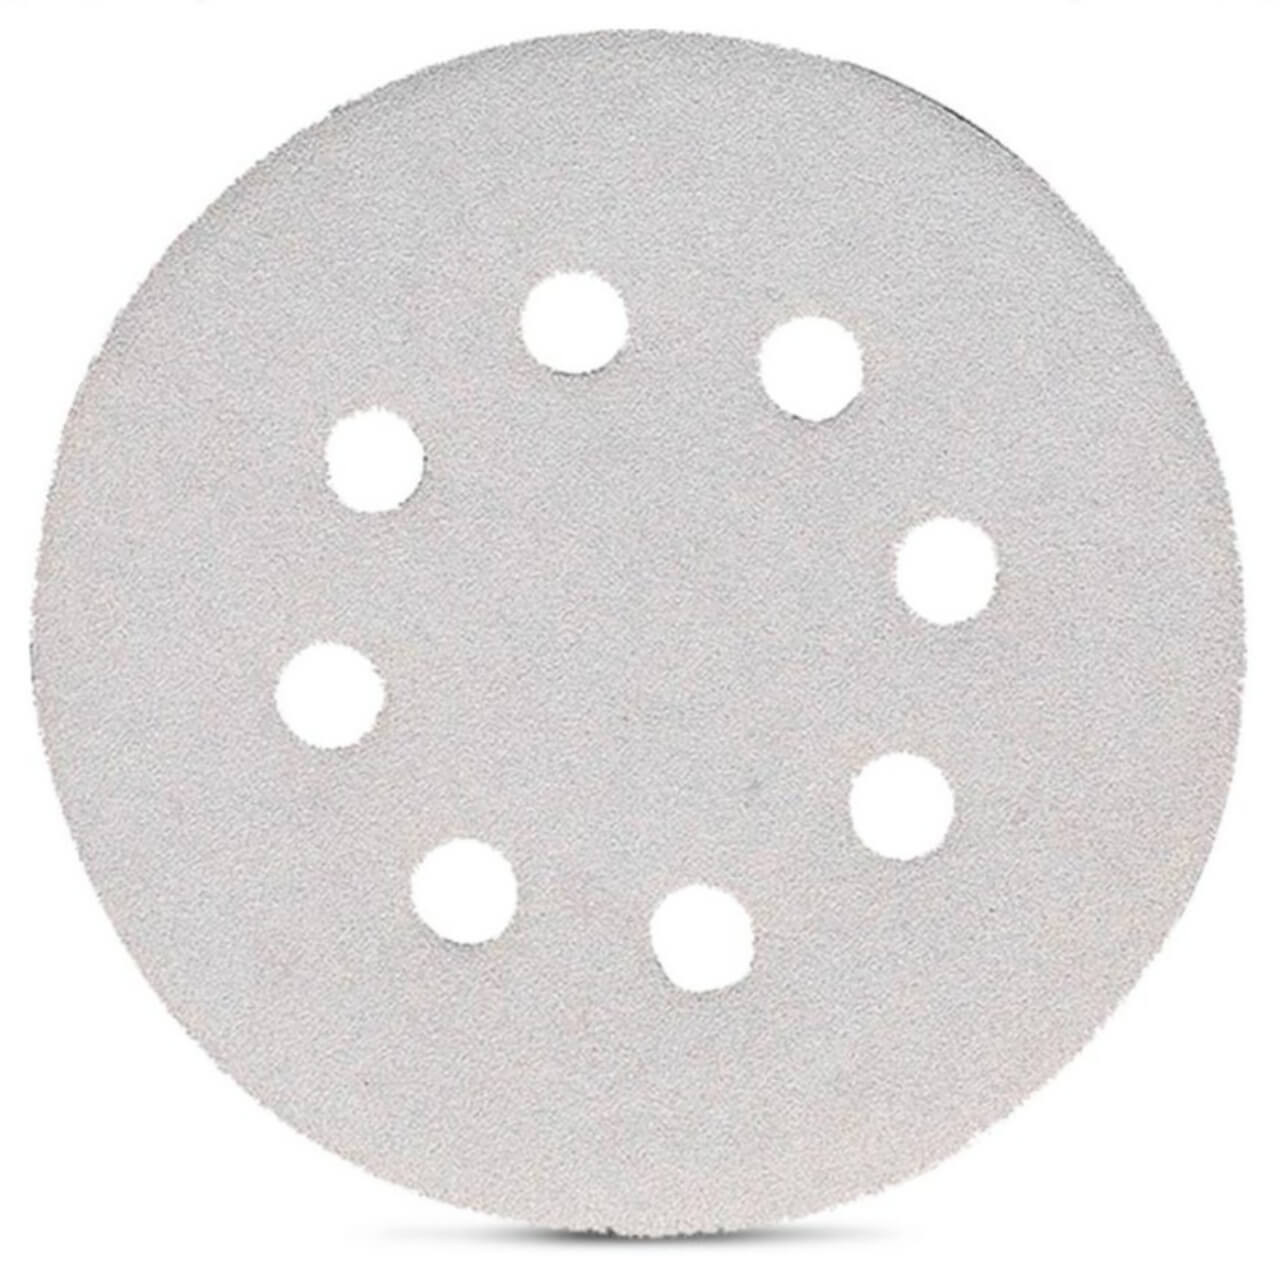 Makita Sanding Disc White 125mm / 40# Punched - (10pk)